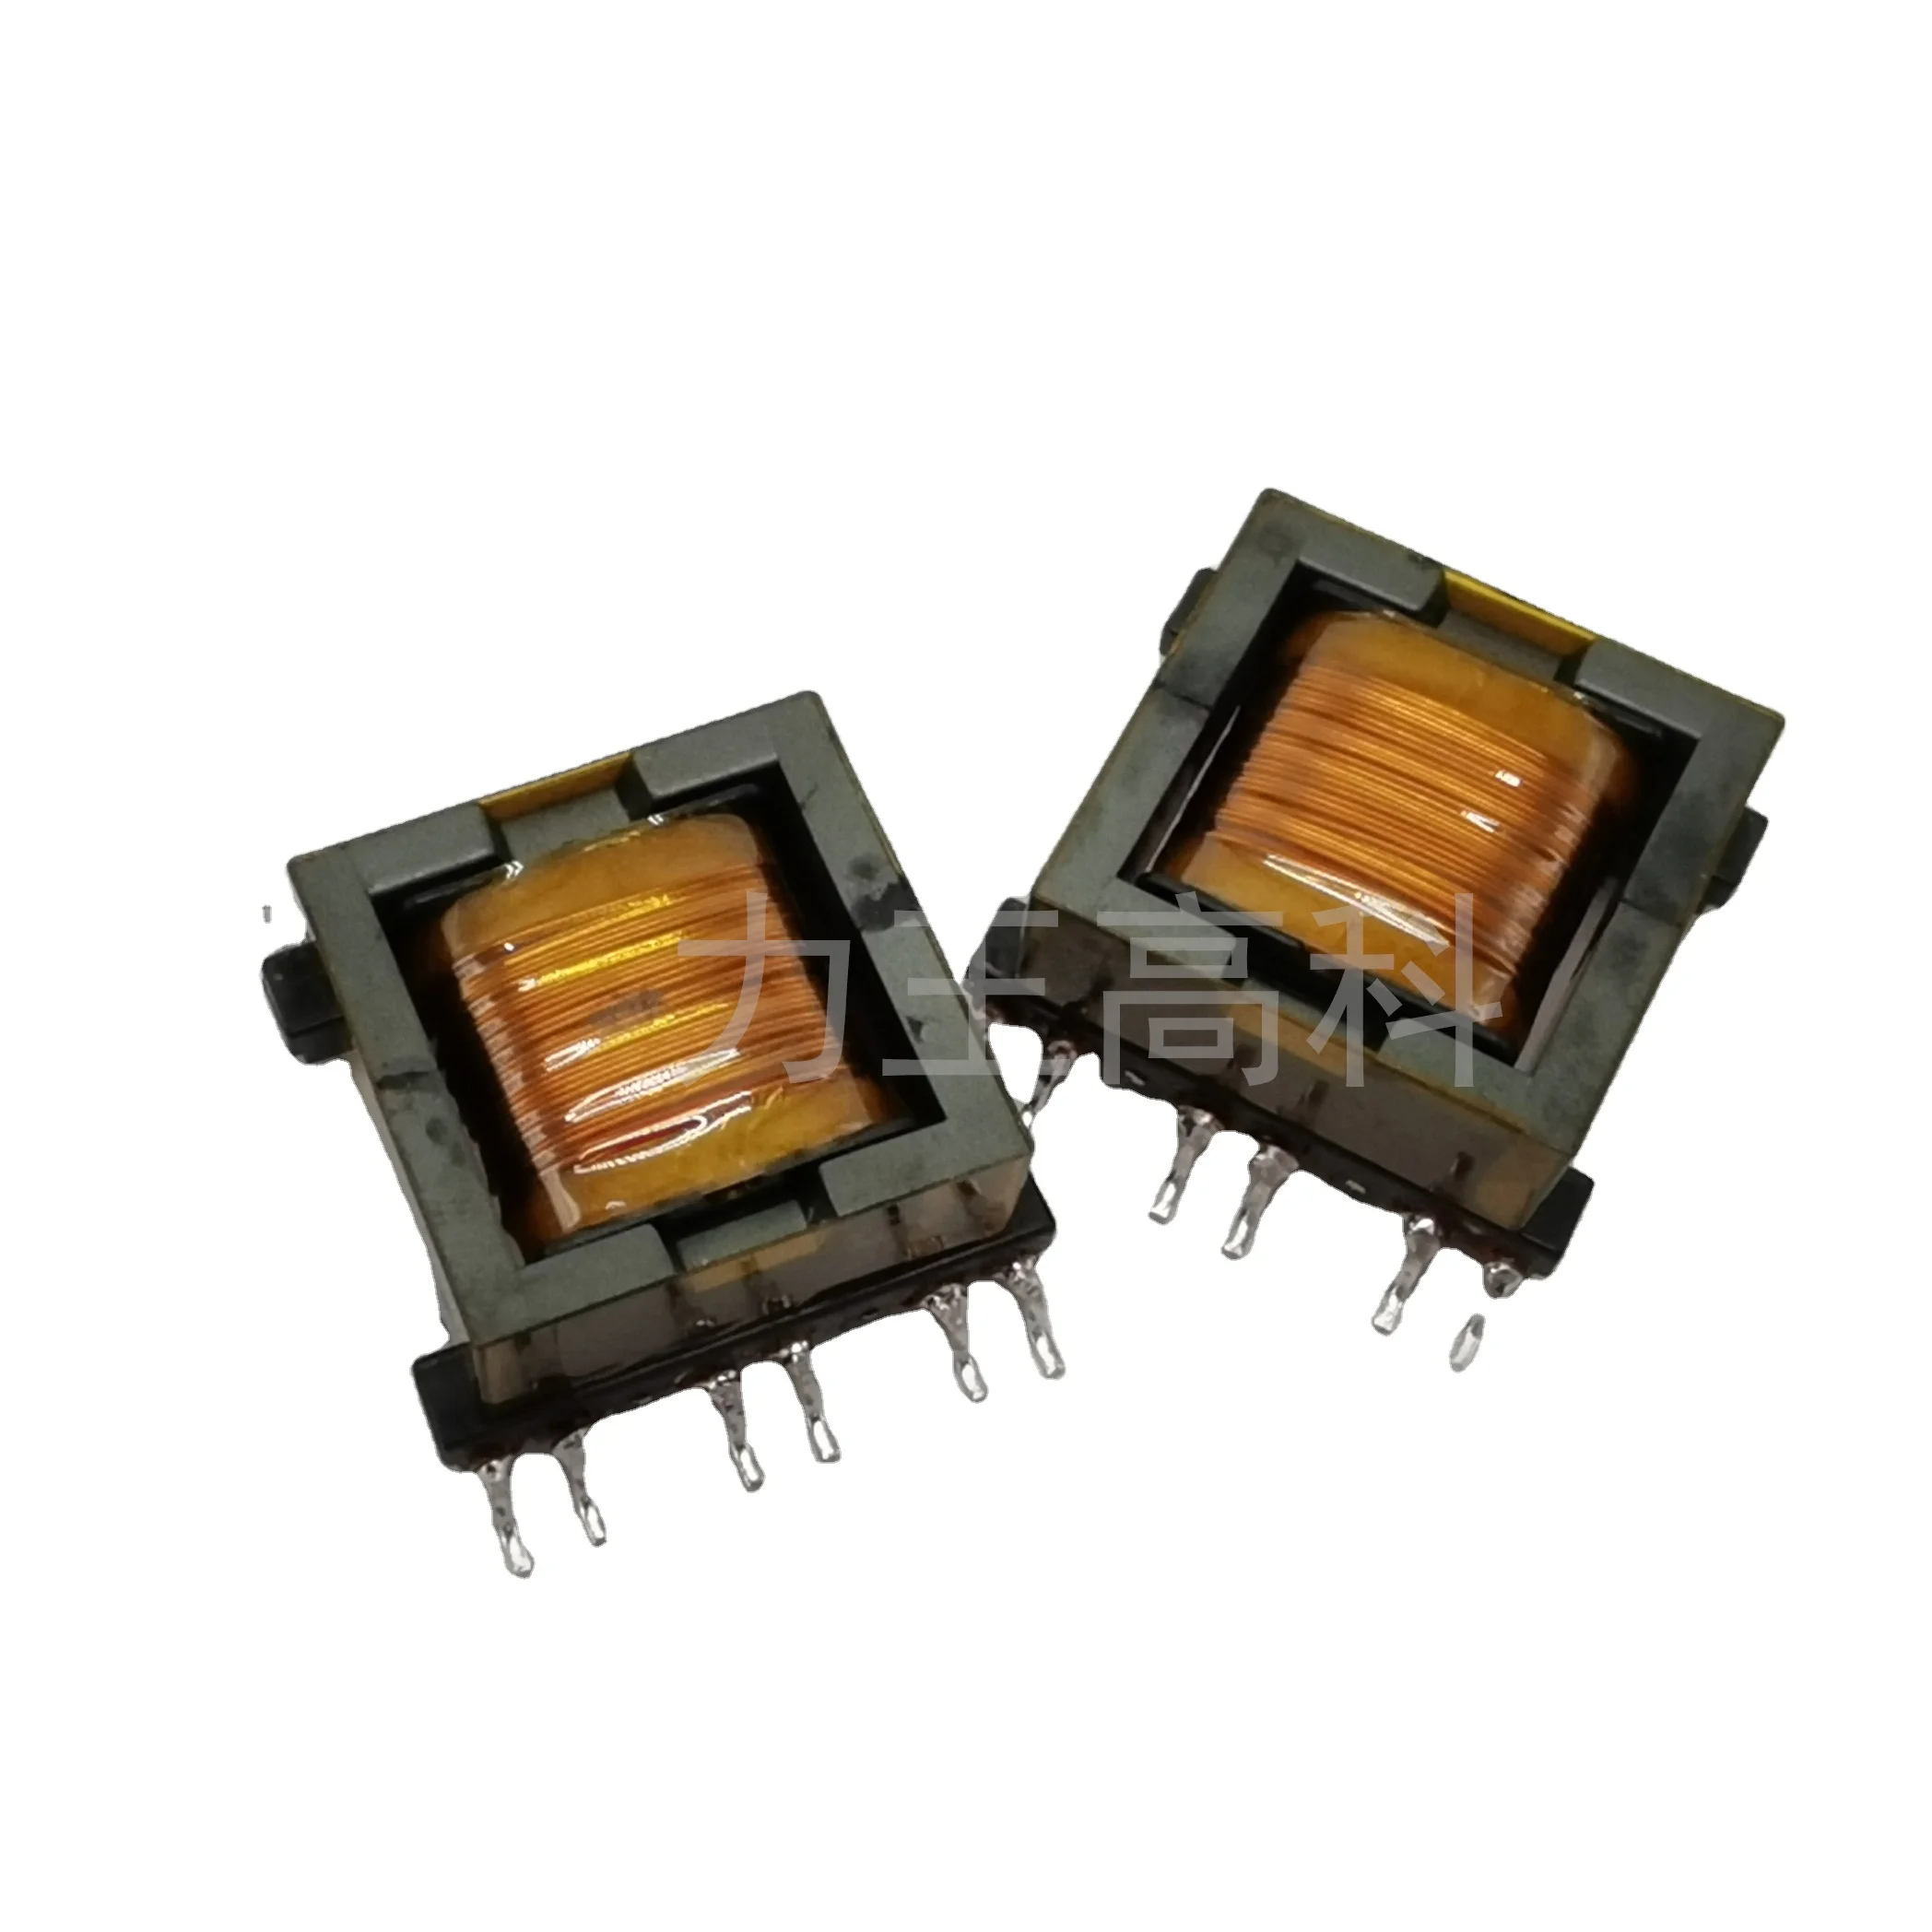 Original manufacturer High-Voltage High-Frequency Switching Power Supply SMD Transformer with Ferrite Core for Inductors Coils